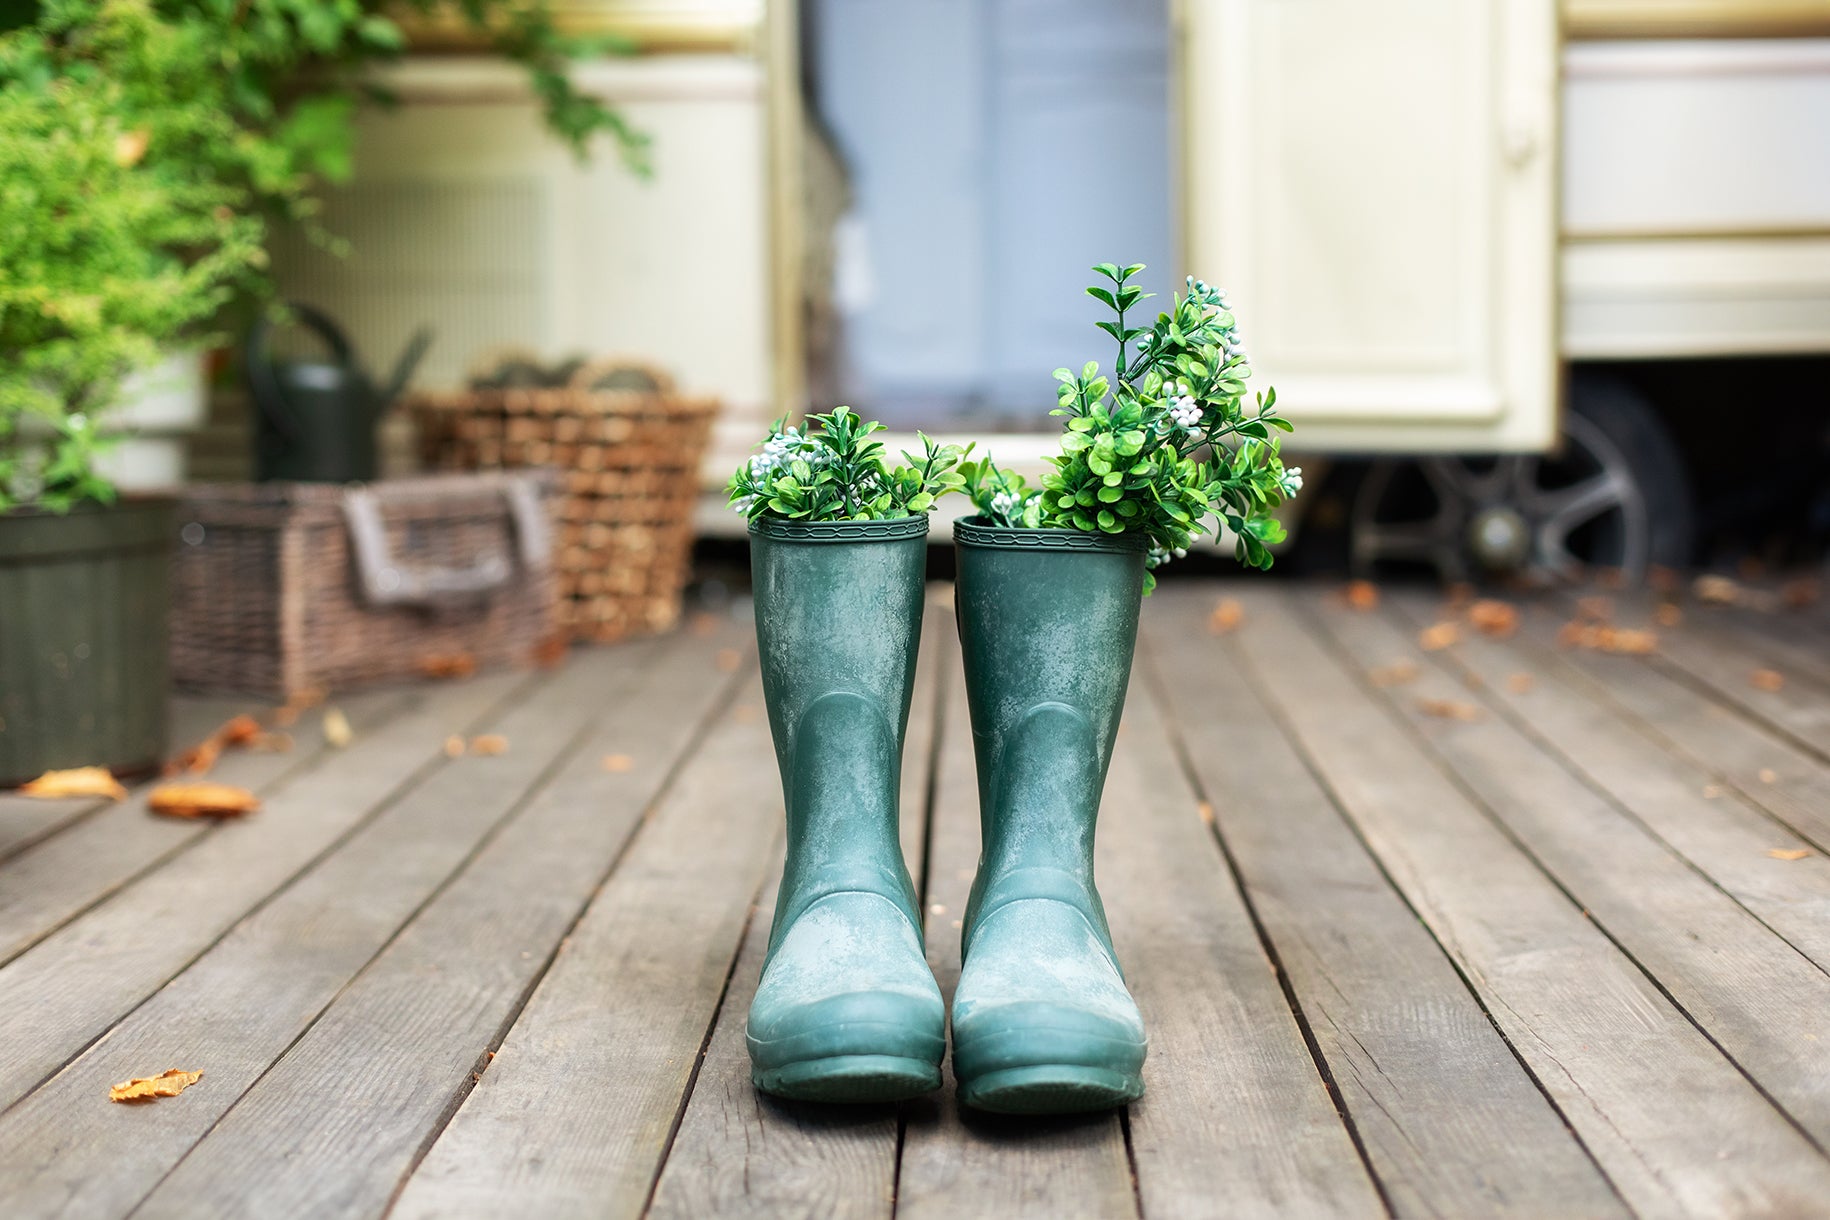 Back porch with a pair of green rainboots with plants in them.